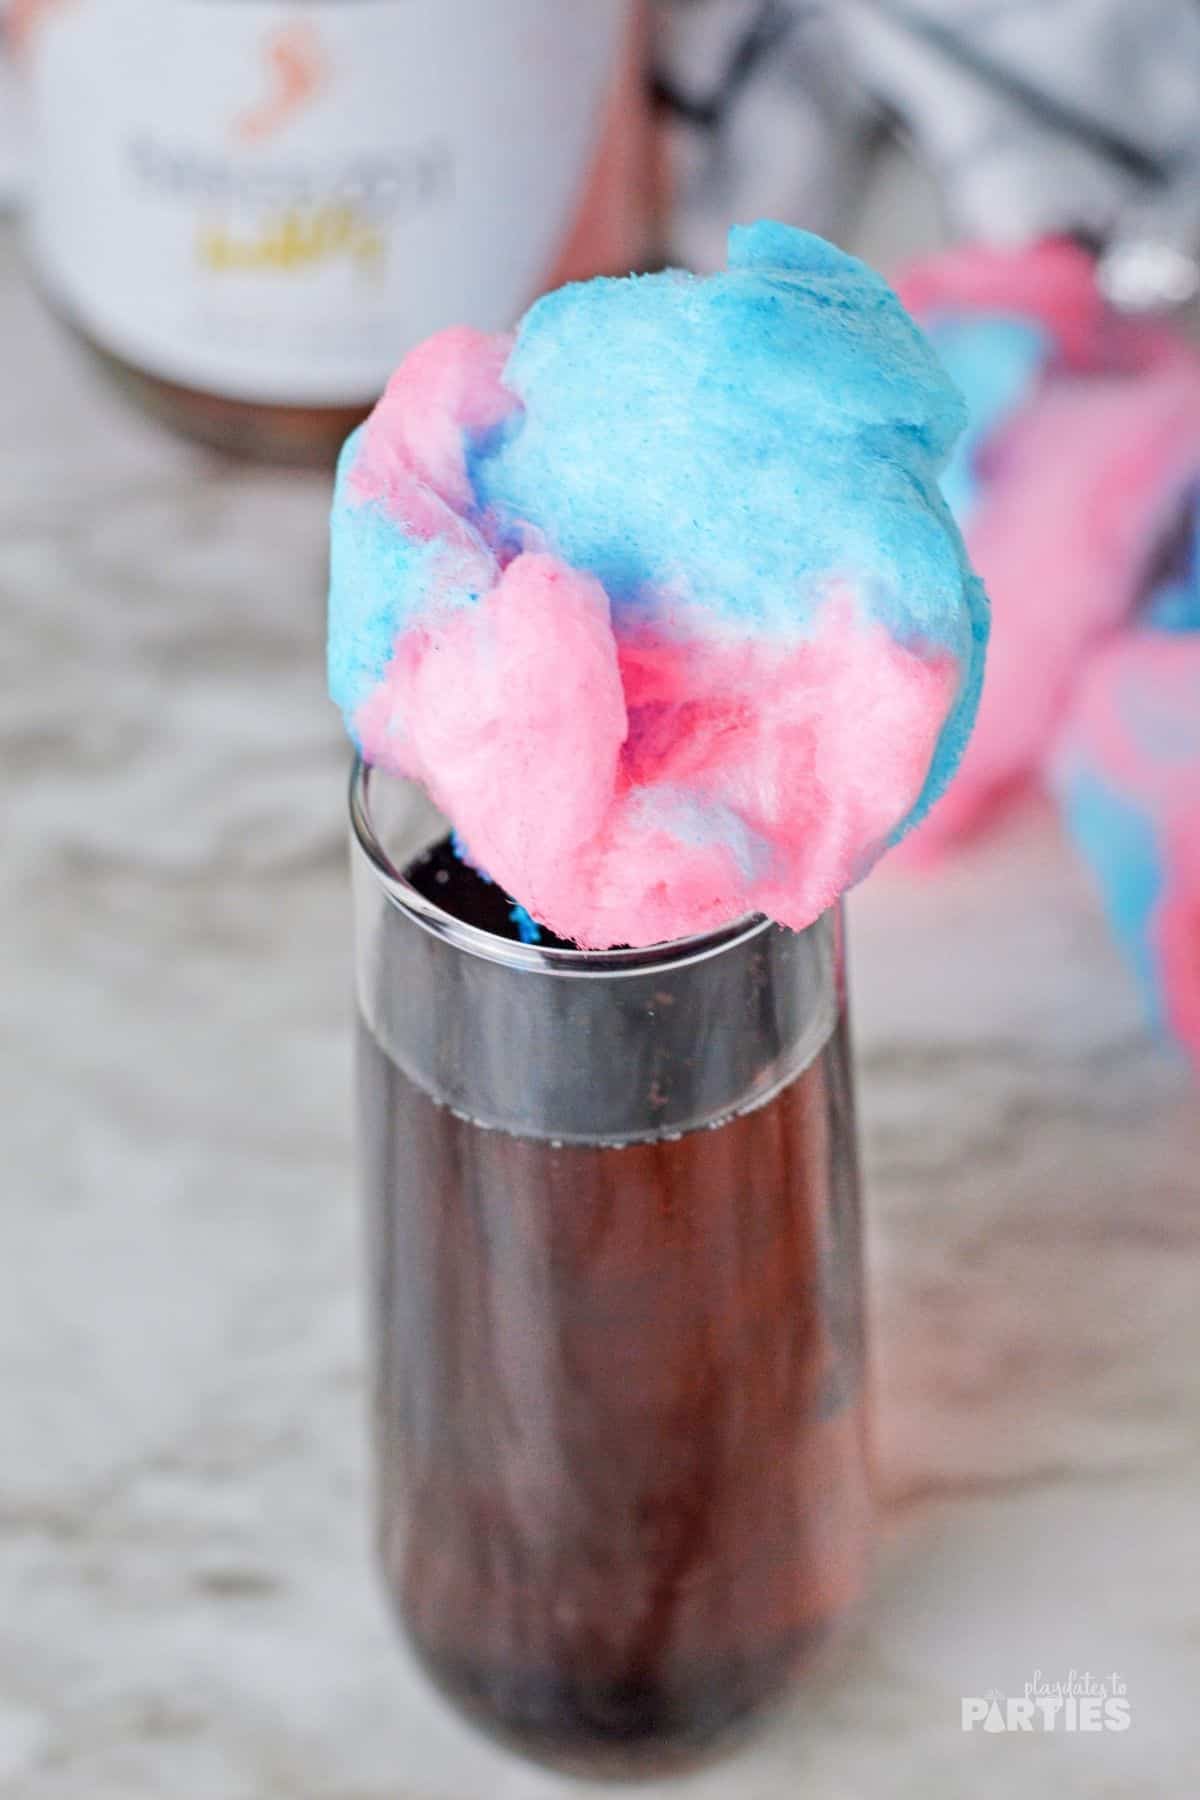 A champagne flute with blue and pink cotton candy on top.